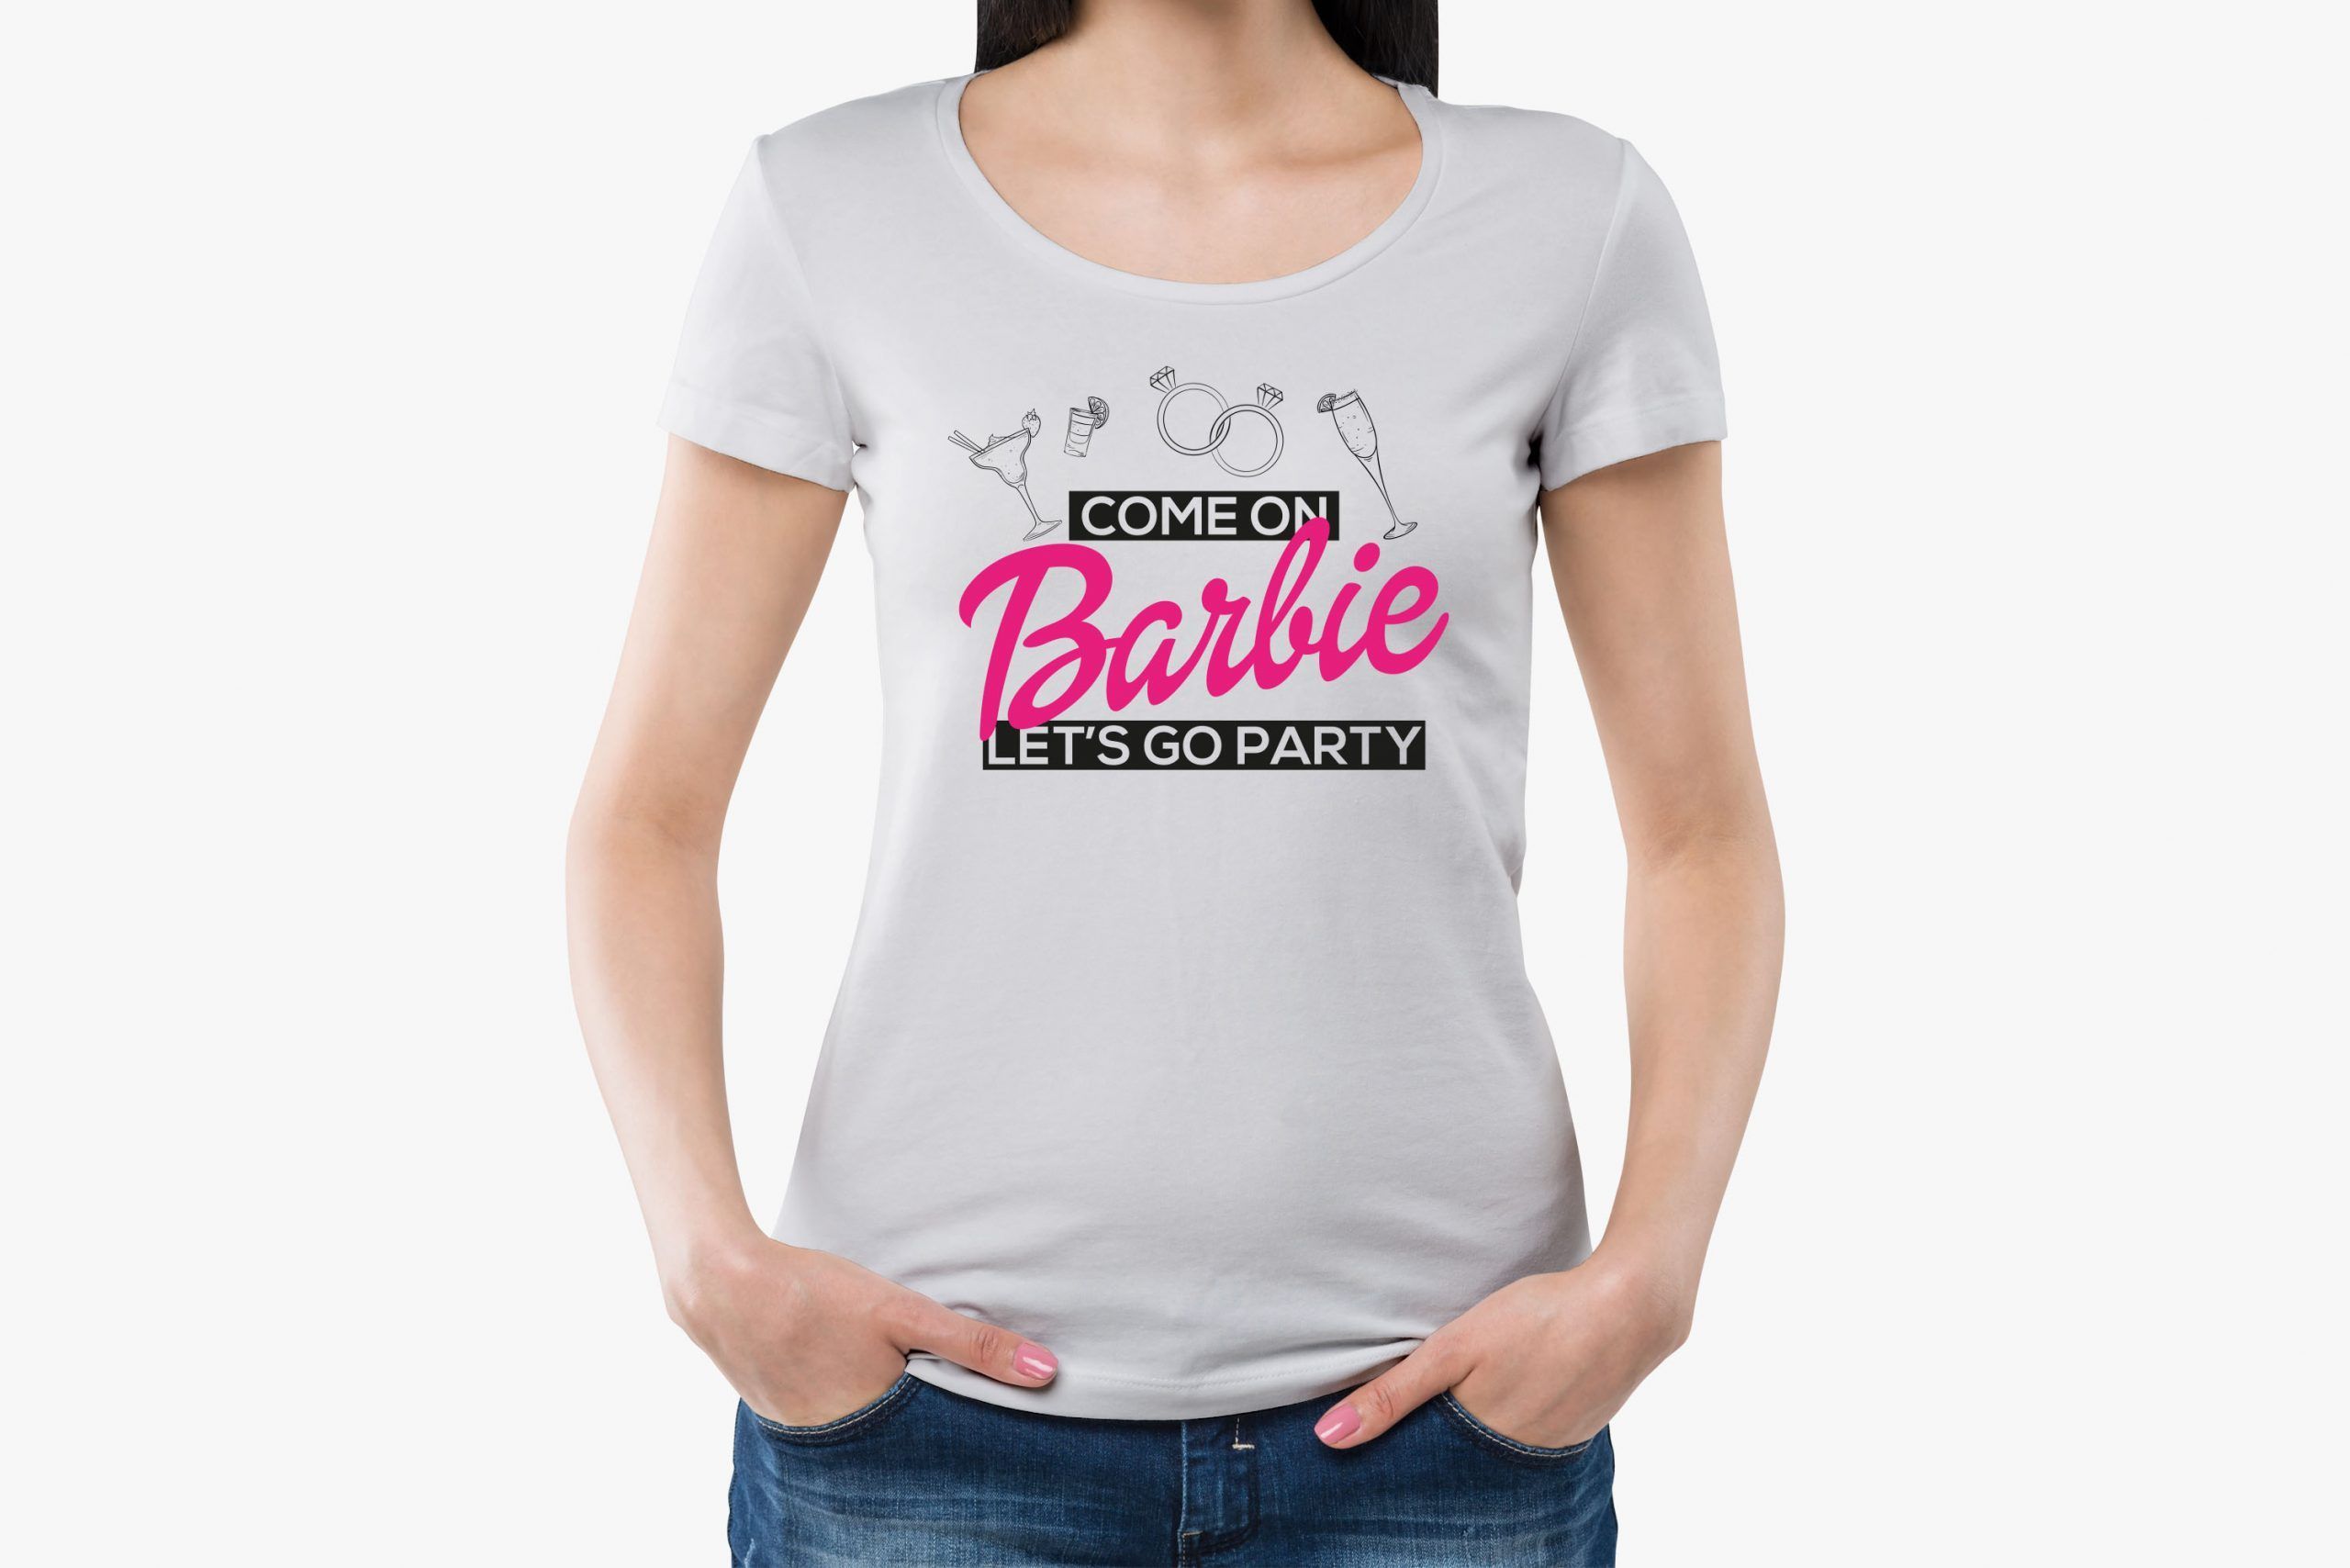 Come on Barbie let´s go party